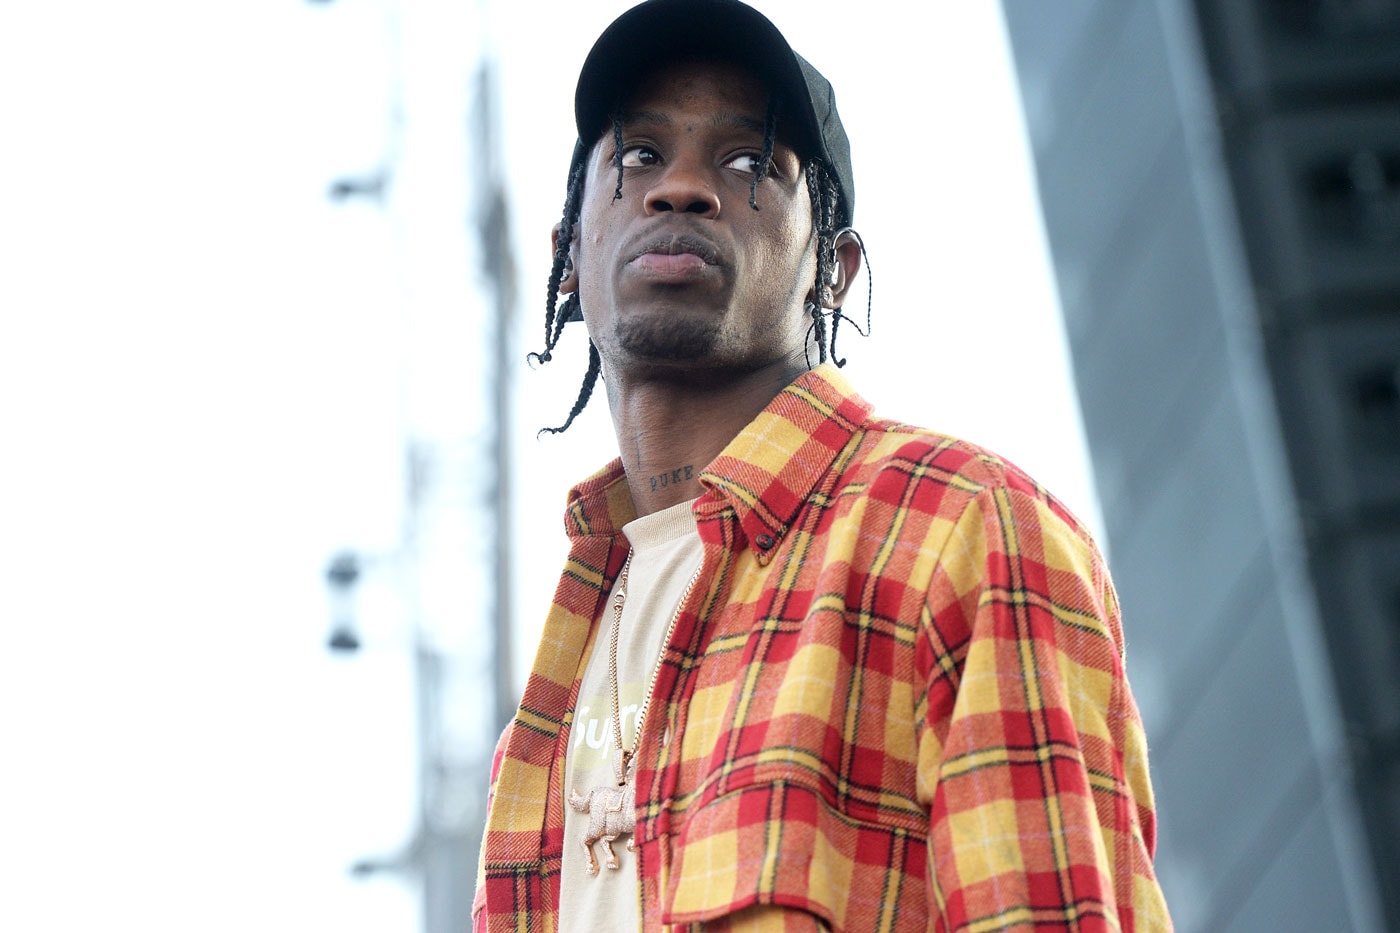 The Internet Reacts to the Leak of Travi$ Scott's 'RODEO'